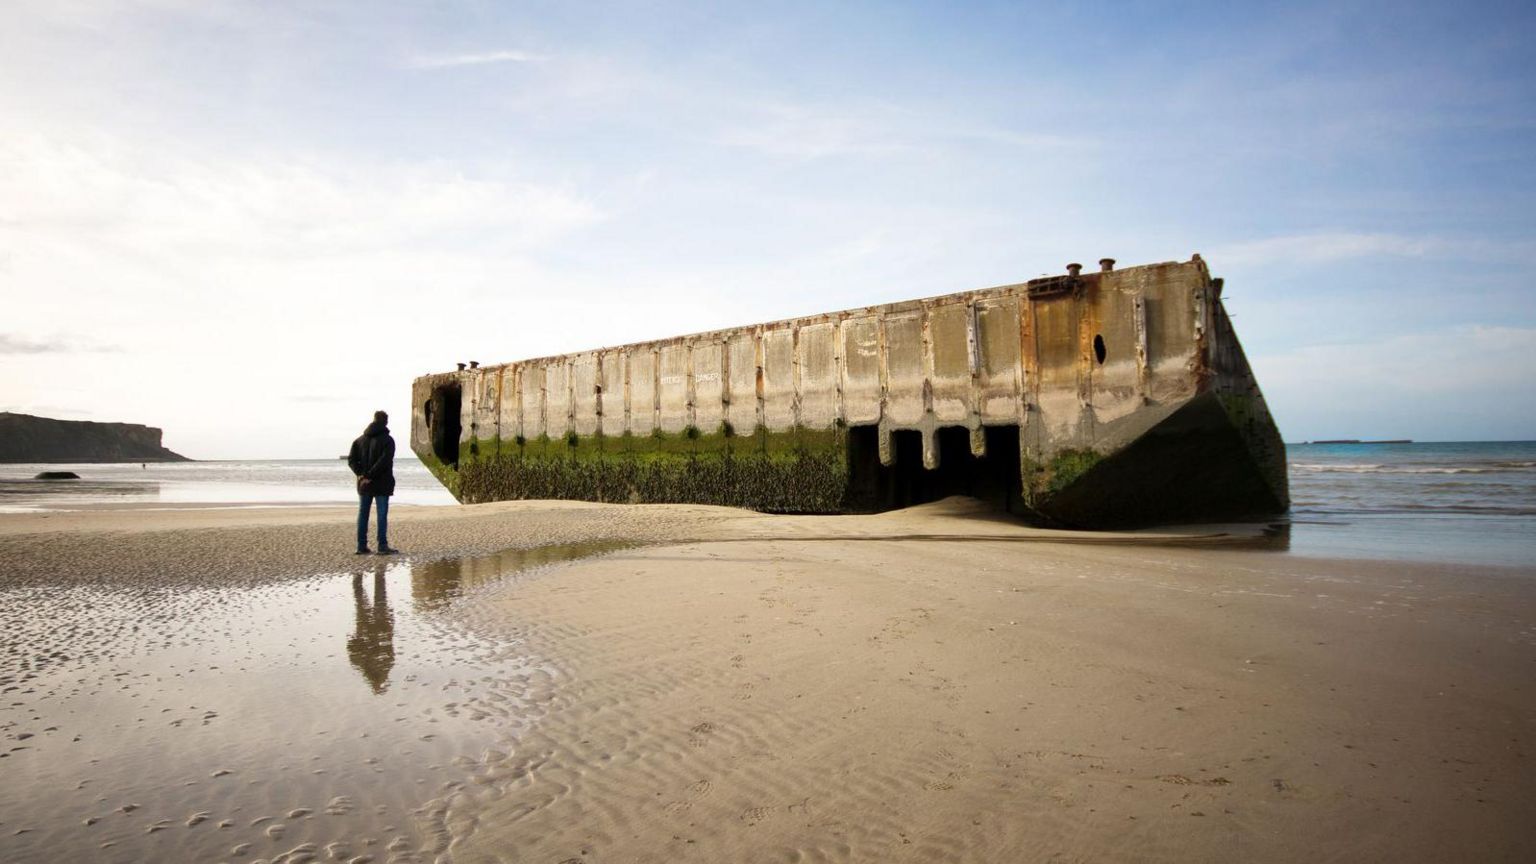 Remains of Mulberry Harbour at Arromanchesin Normandy